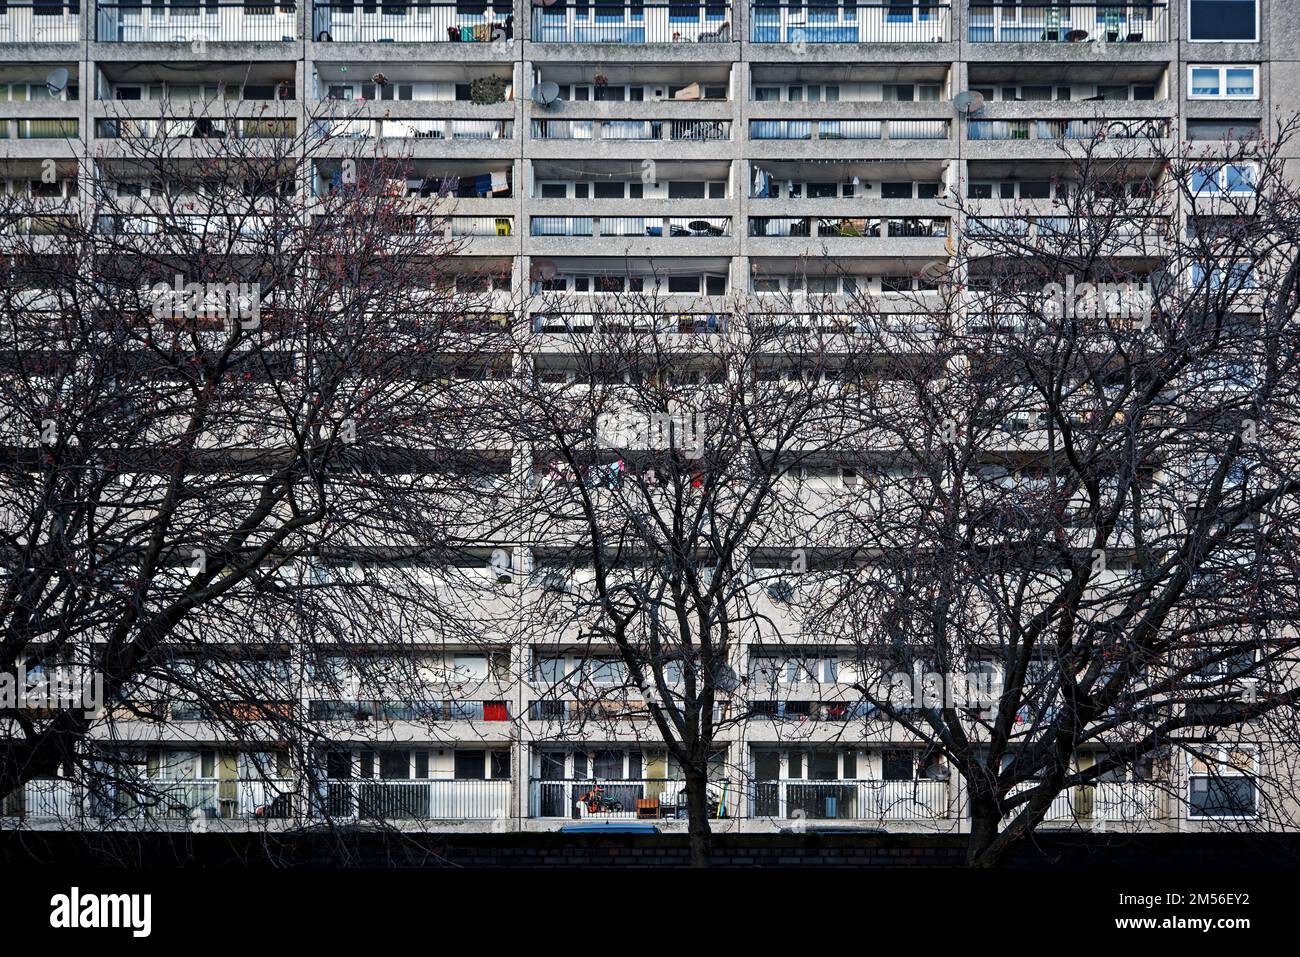 Cables Wynd House, better known as the Leith Banana Flats in Leith Edinburgh, built between 1962 and 1965. Stock Photo